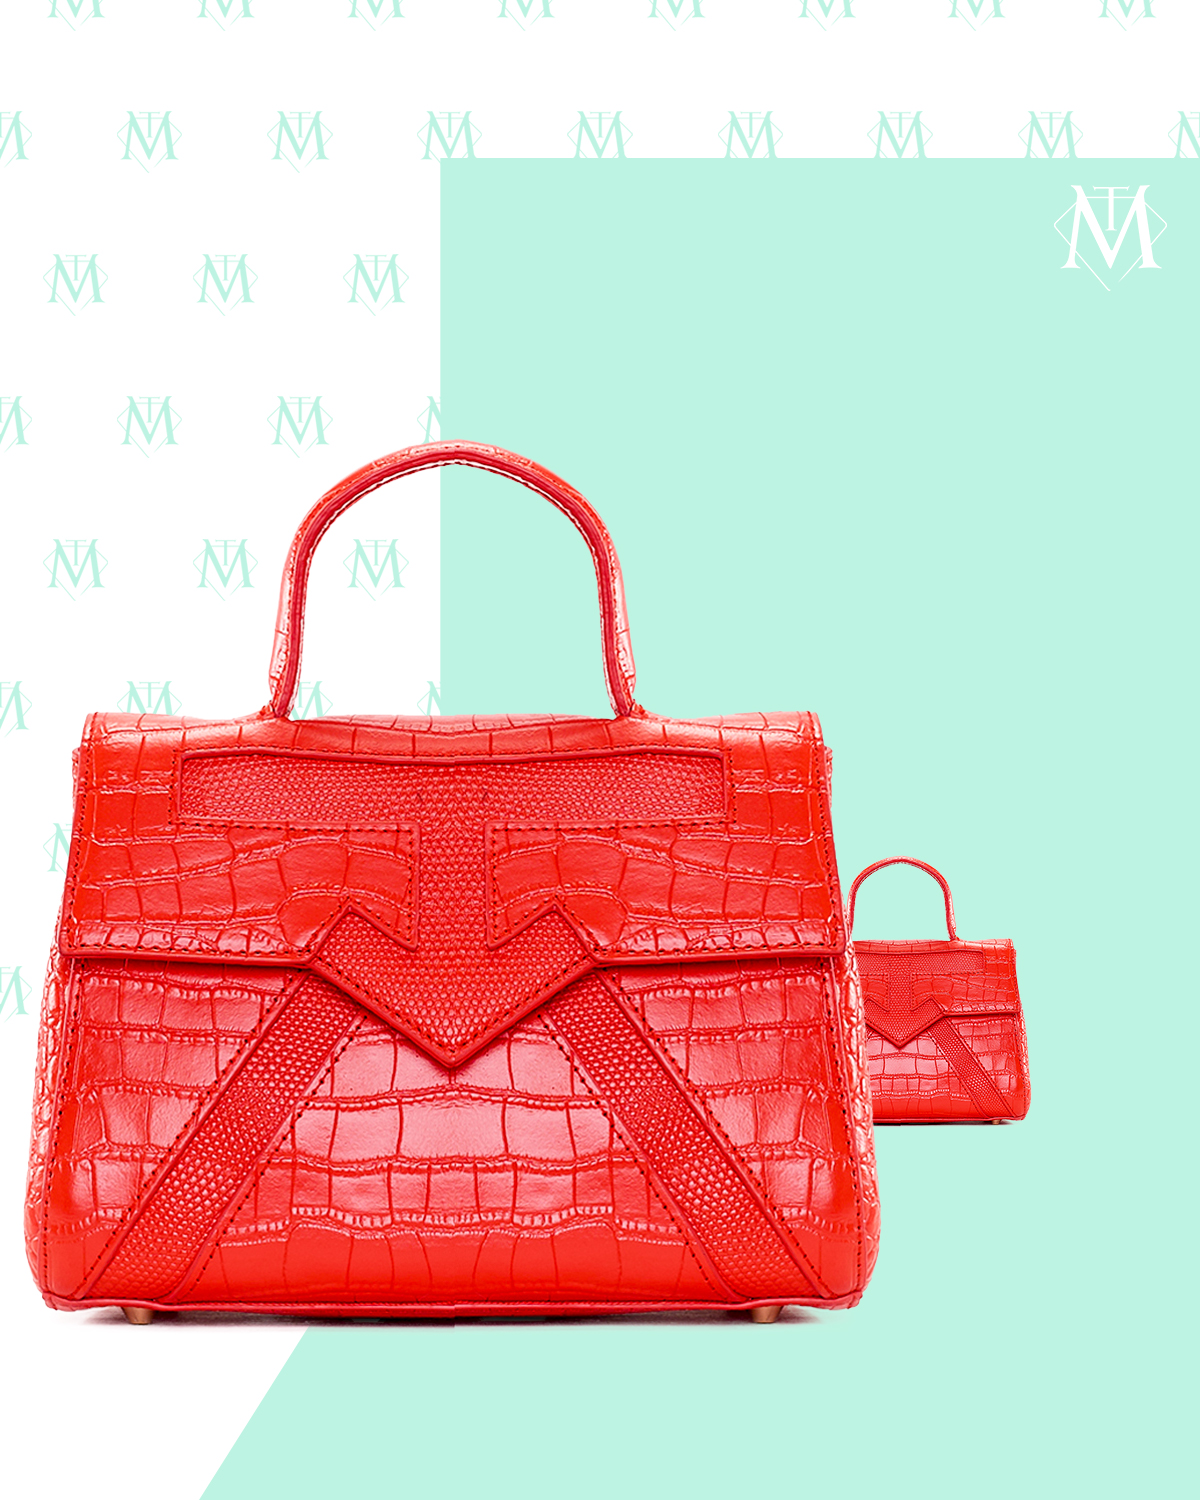 The TM Mini Handbag May Be The New Hero Piece For All Outfits!